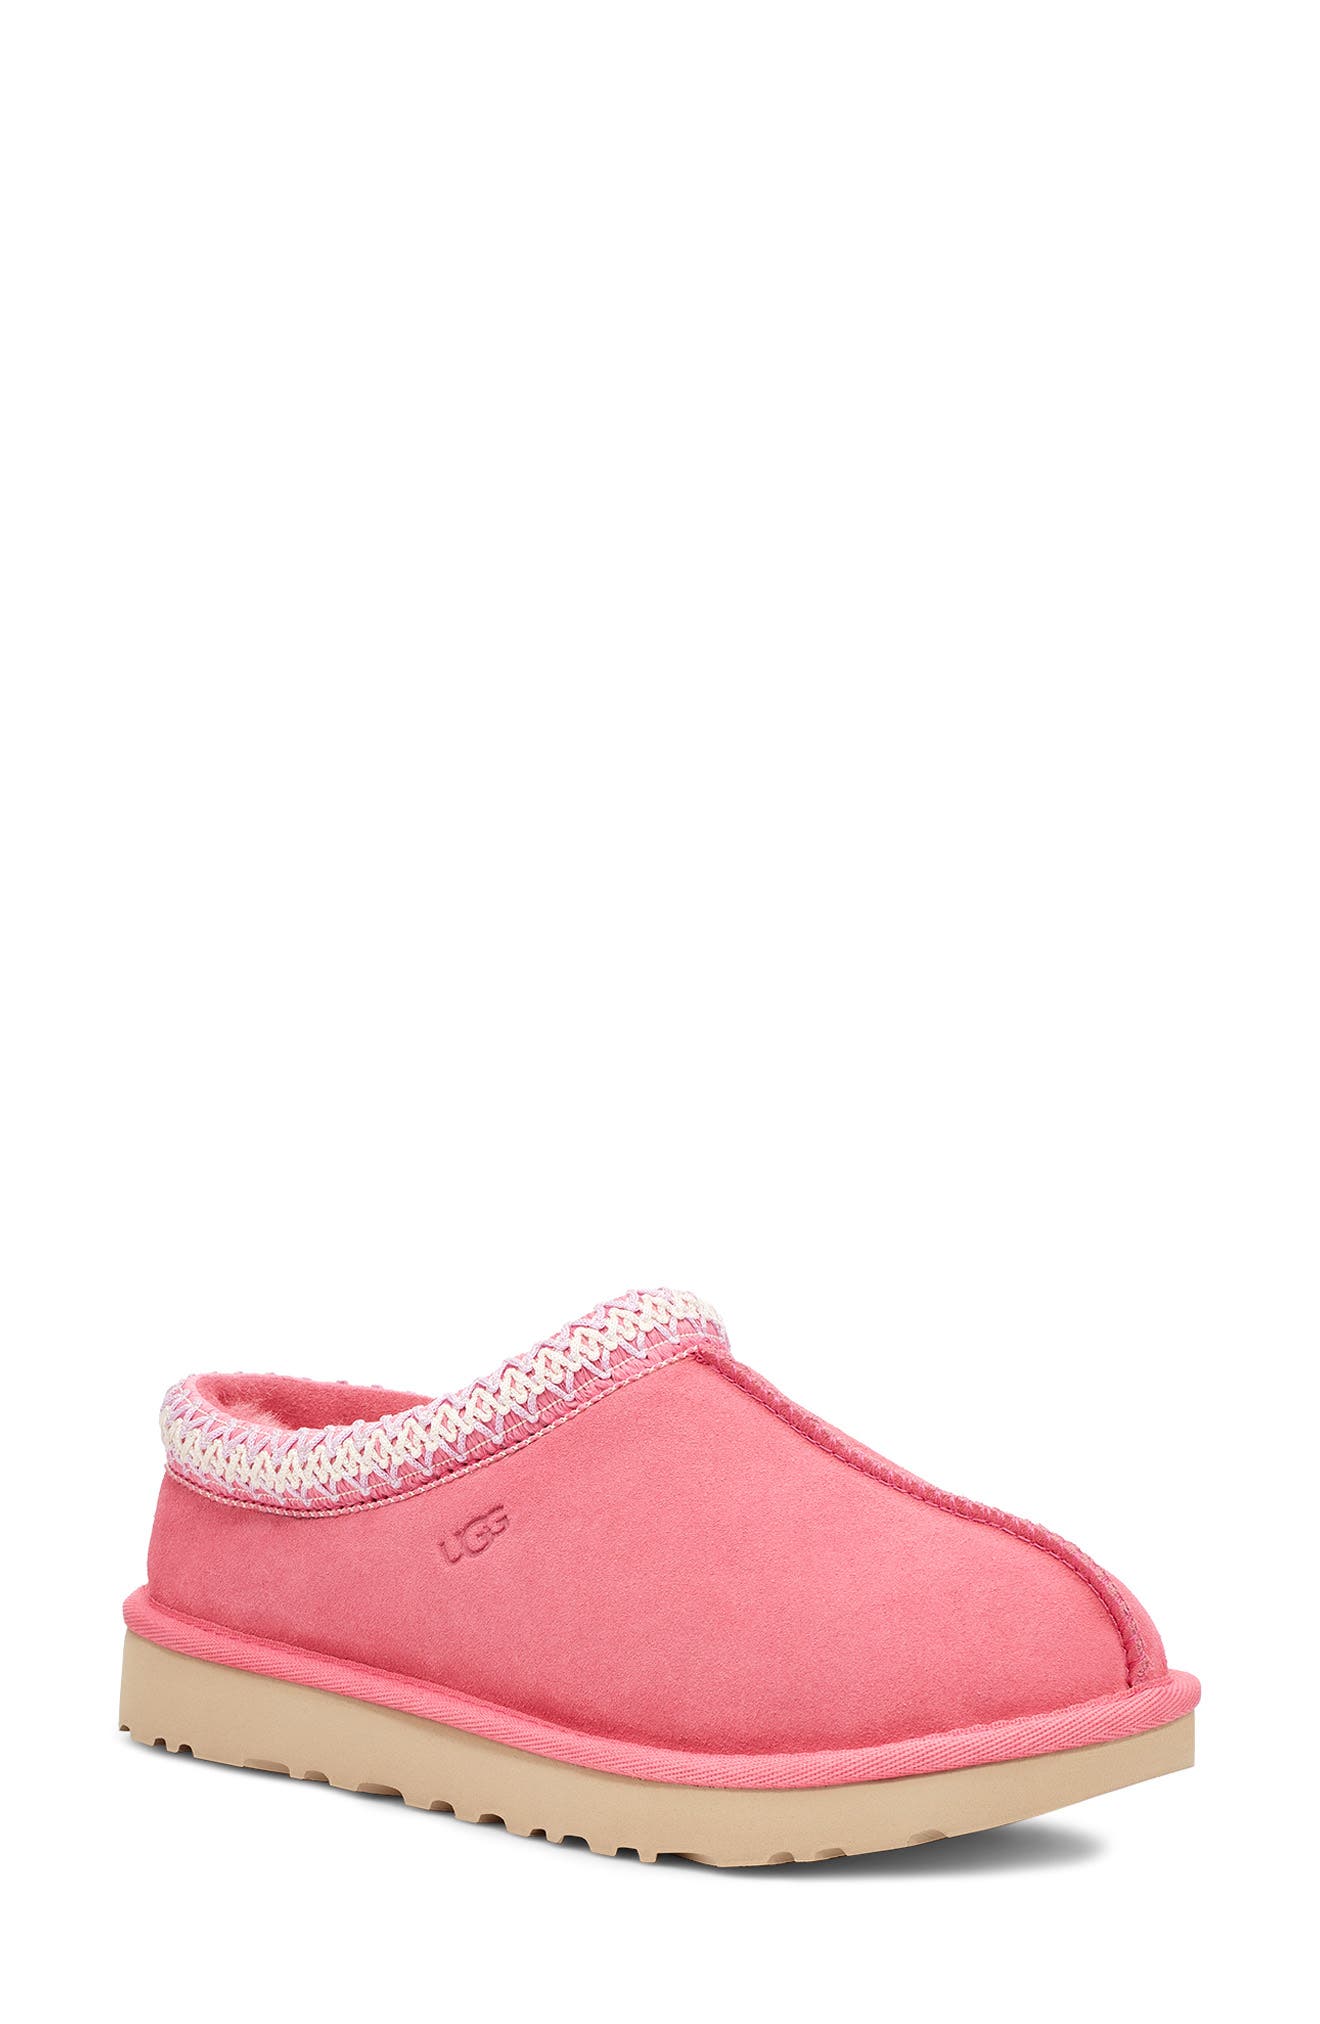 ugg pink slippers